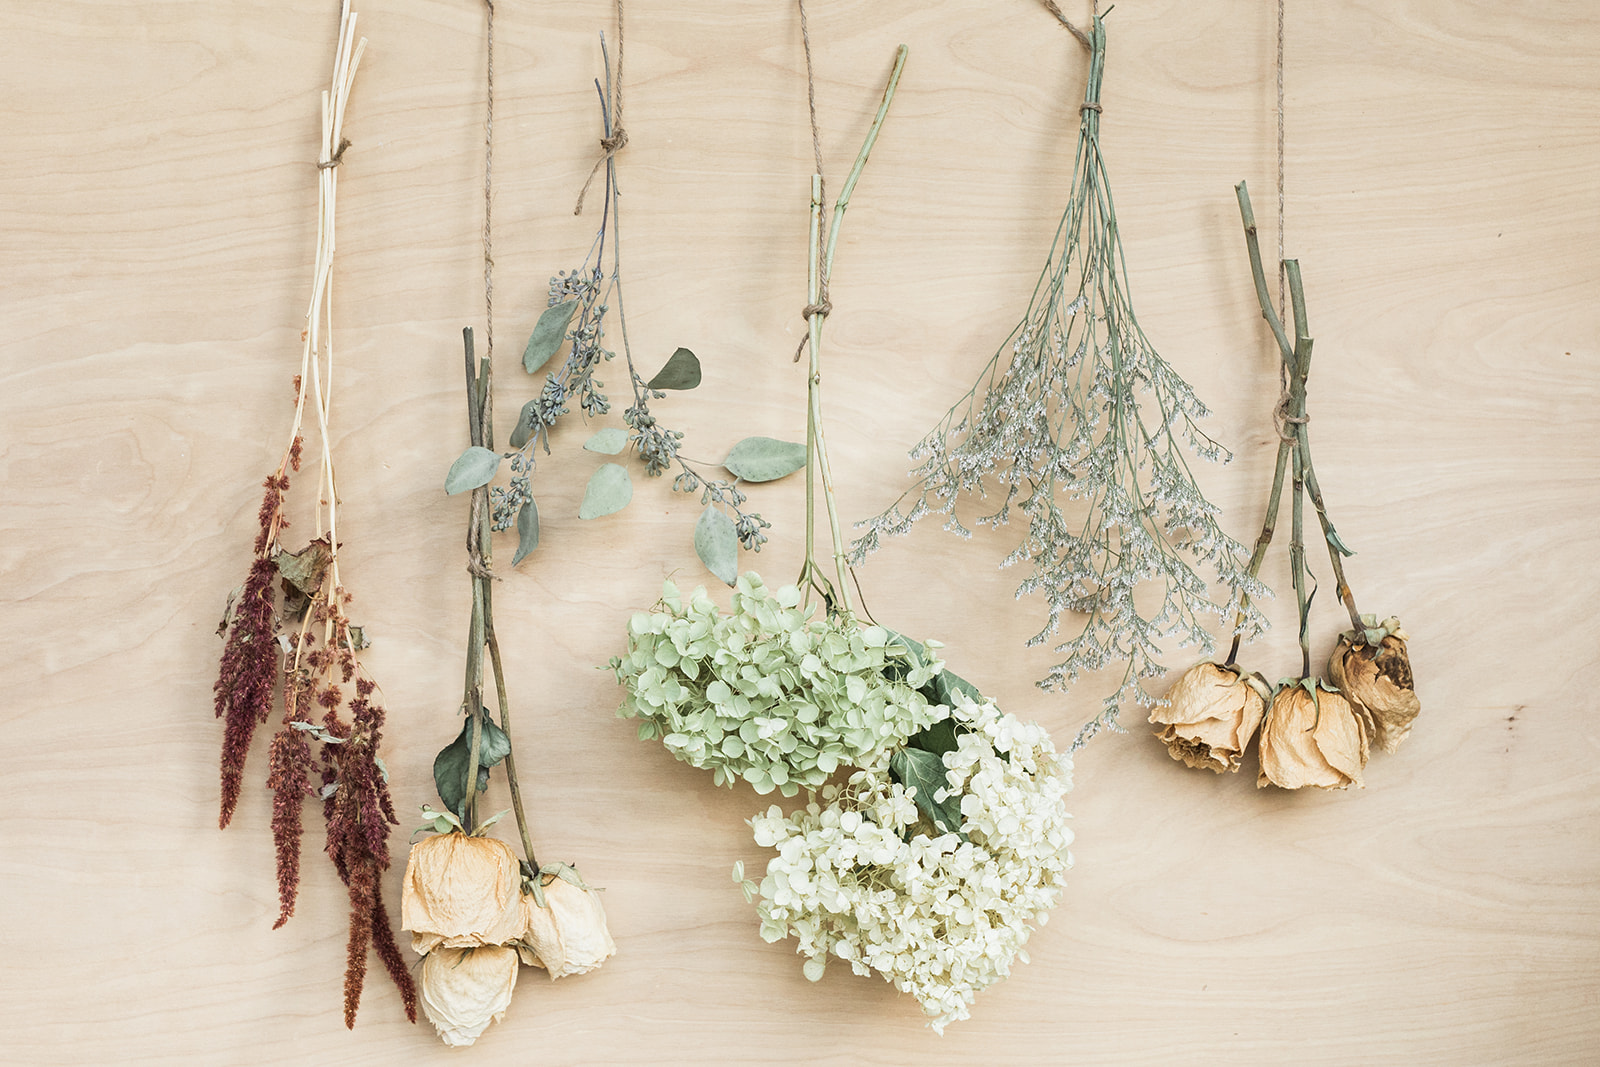 How To Dry Your Wedding Bouquet - on the Bronte Bride Blog